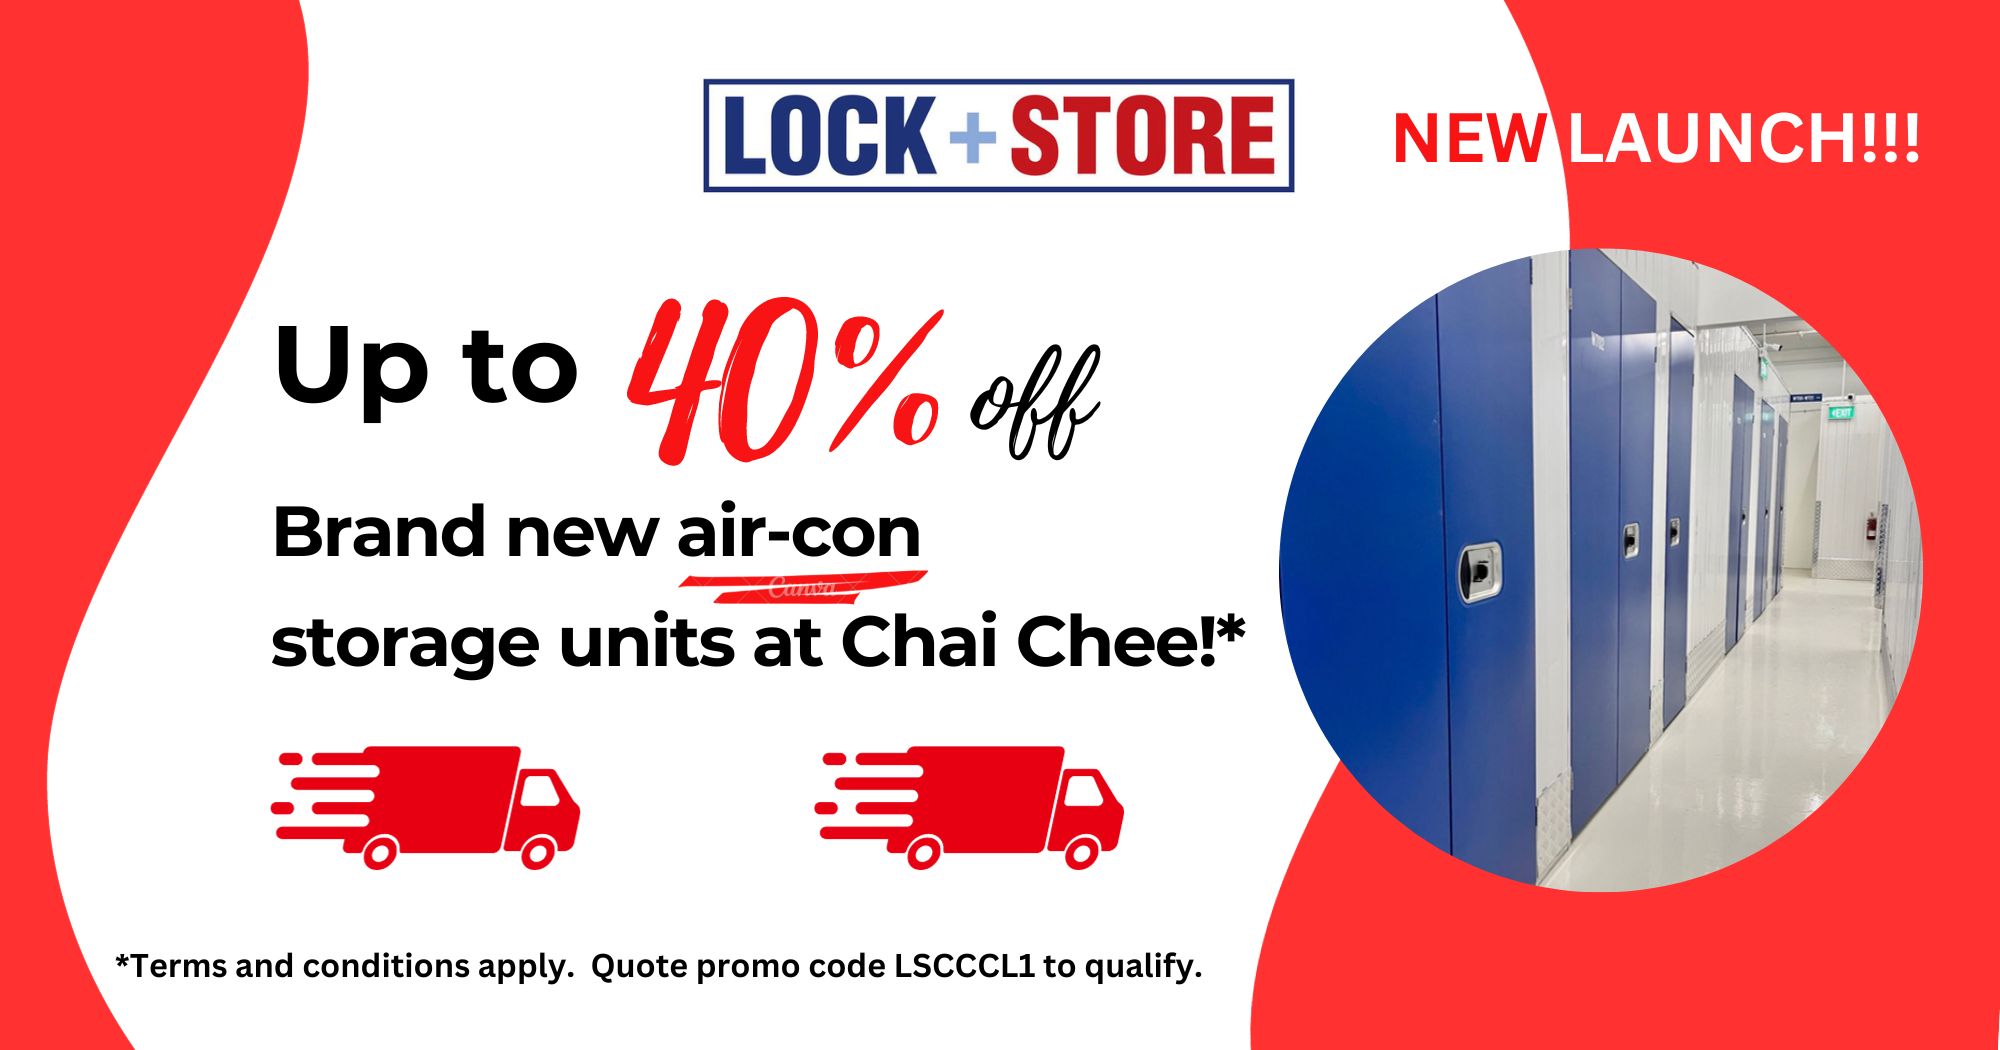 40 percent off new air-conditioned units at Lock+Store Chai Chee